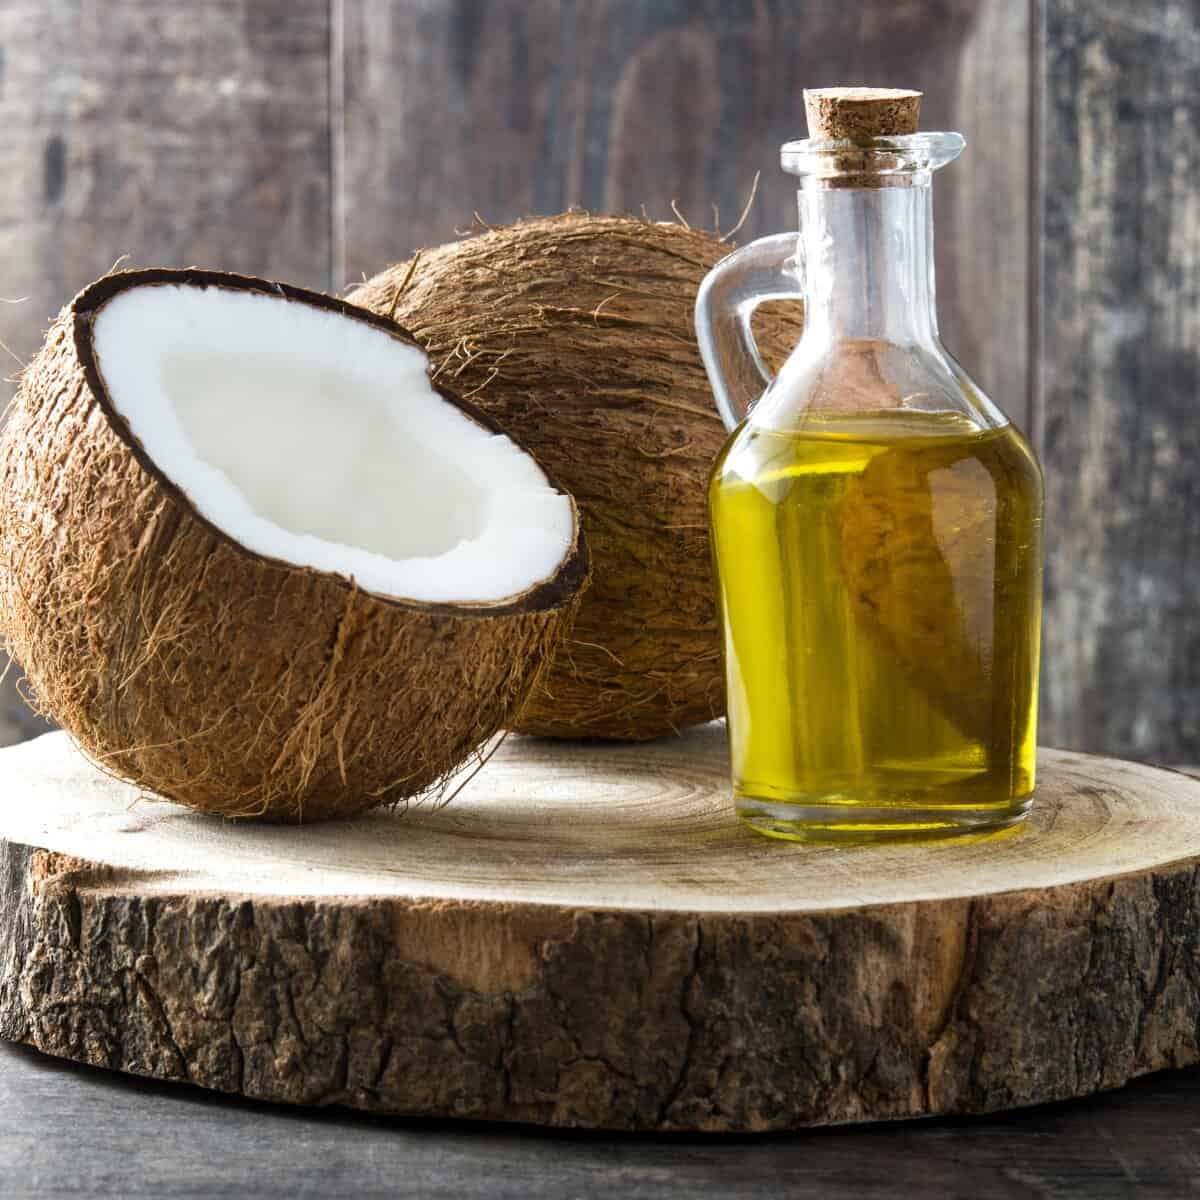 What is coconut oil